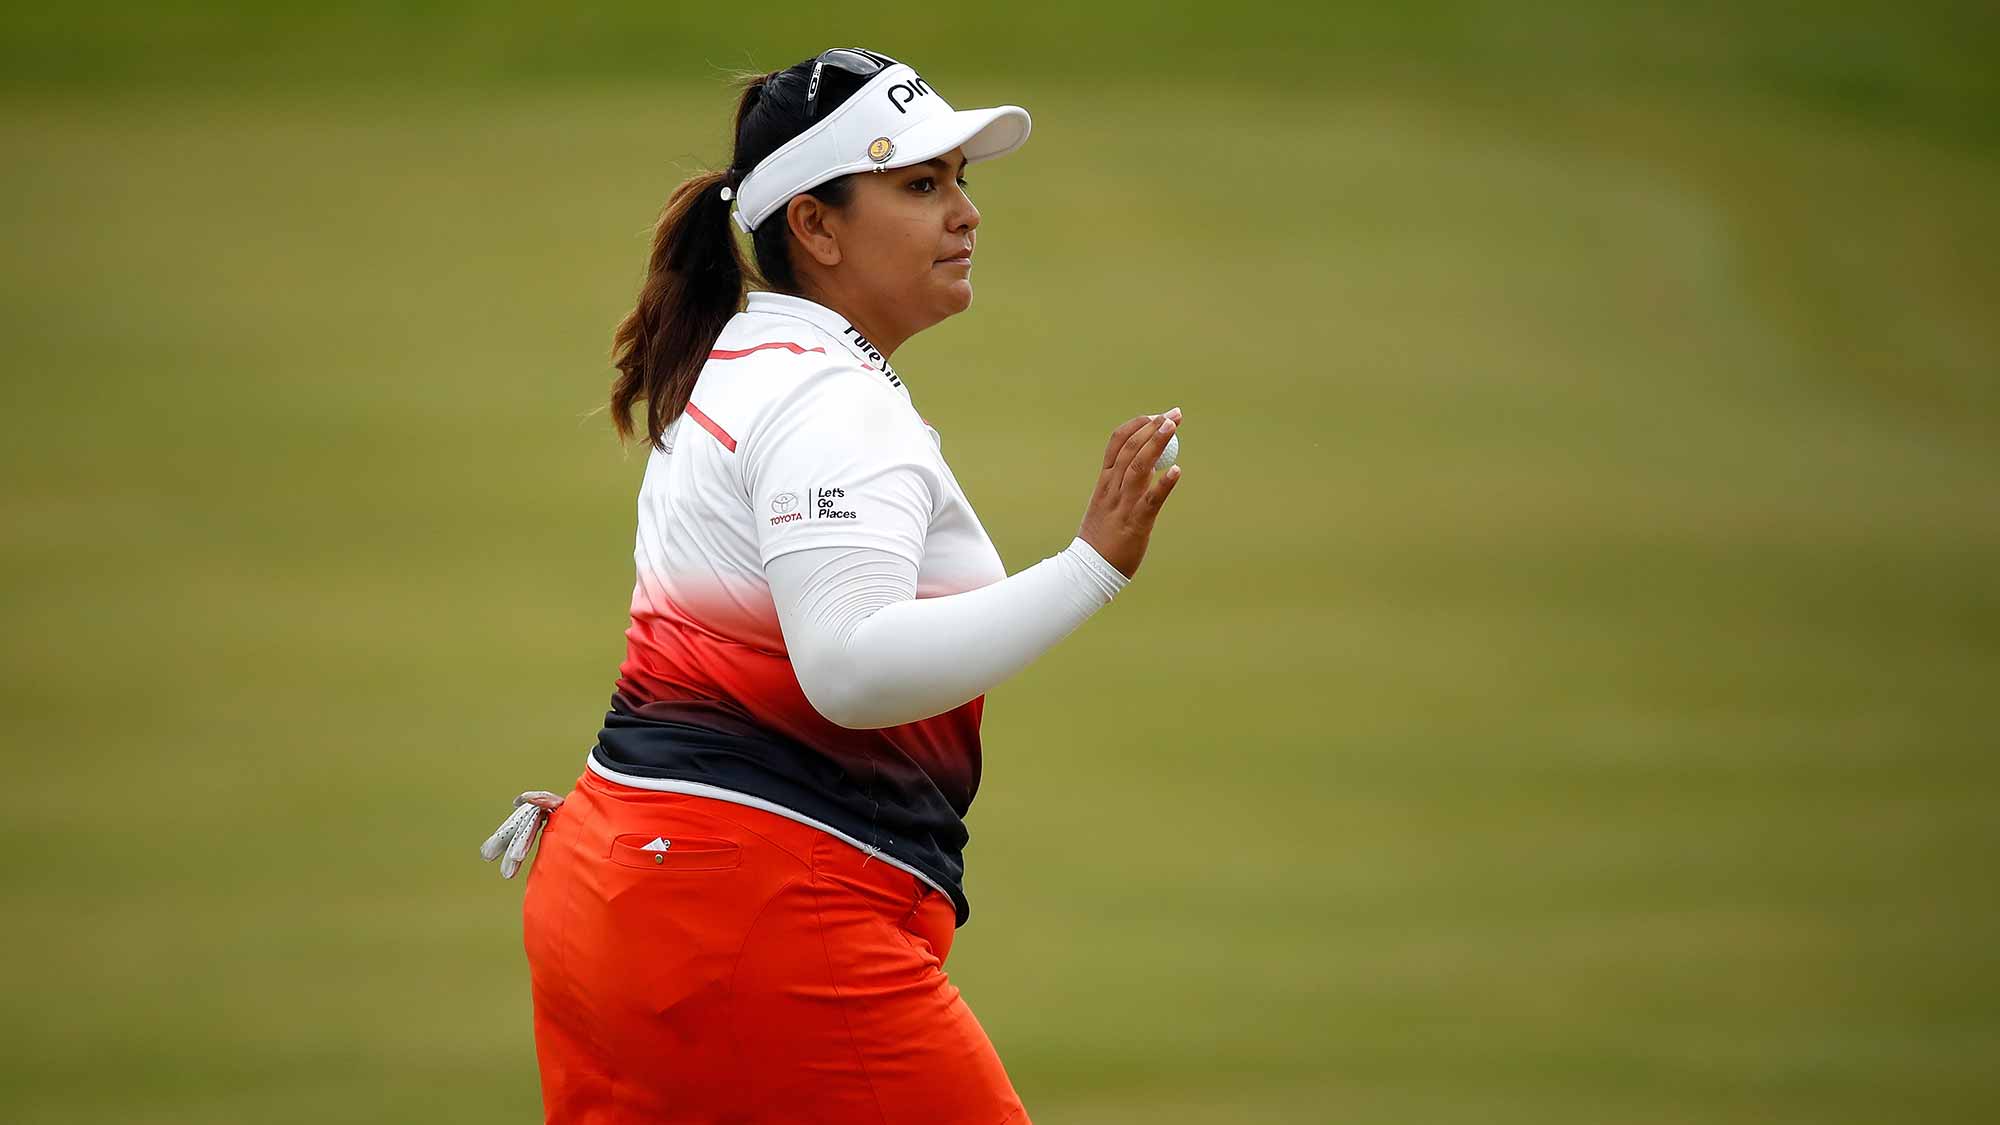 Lizette Salas waves to fans after a par on the 16th green during the third round of the LPGA Volvik Championship on May 27, 2017 at Travis Pointe Country Club Ann Arbor, Michigan